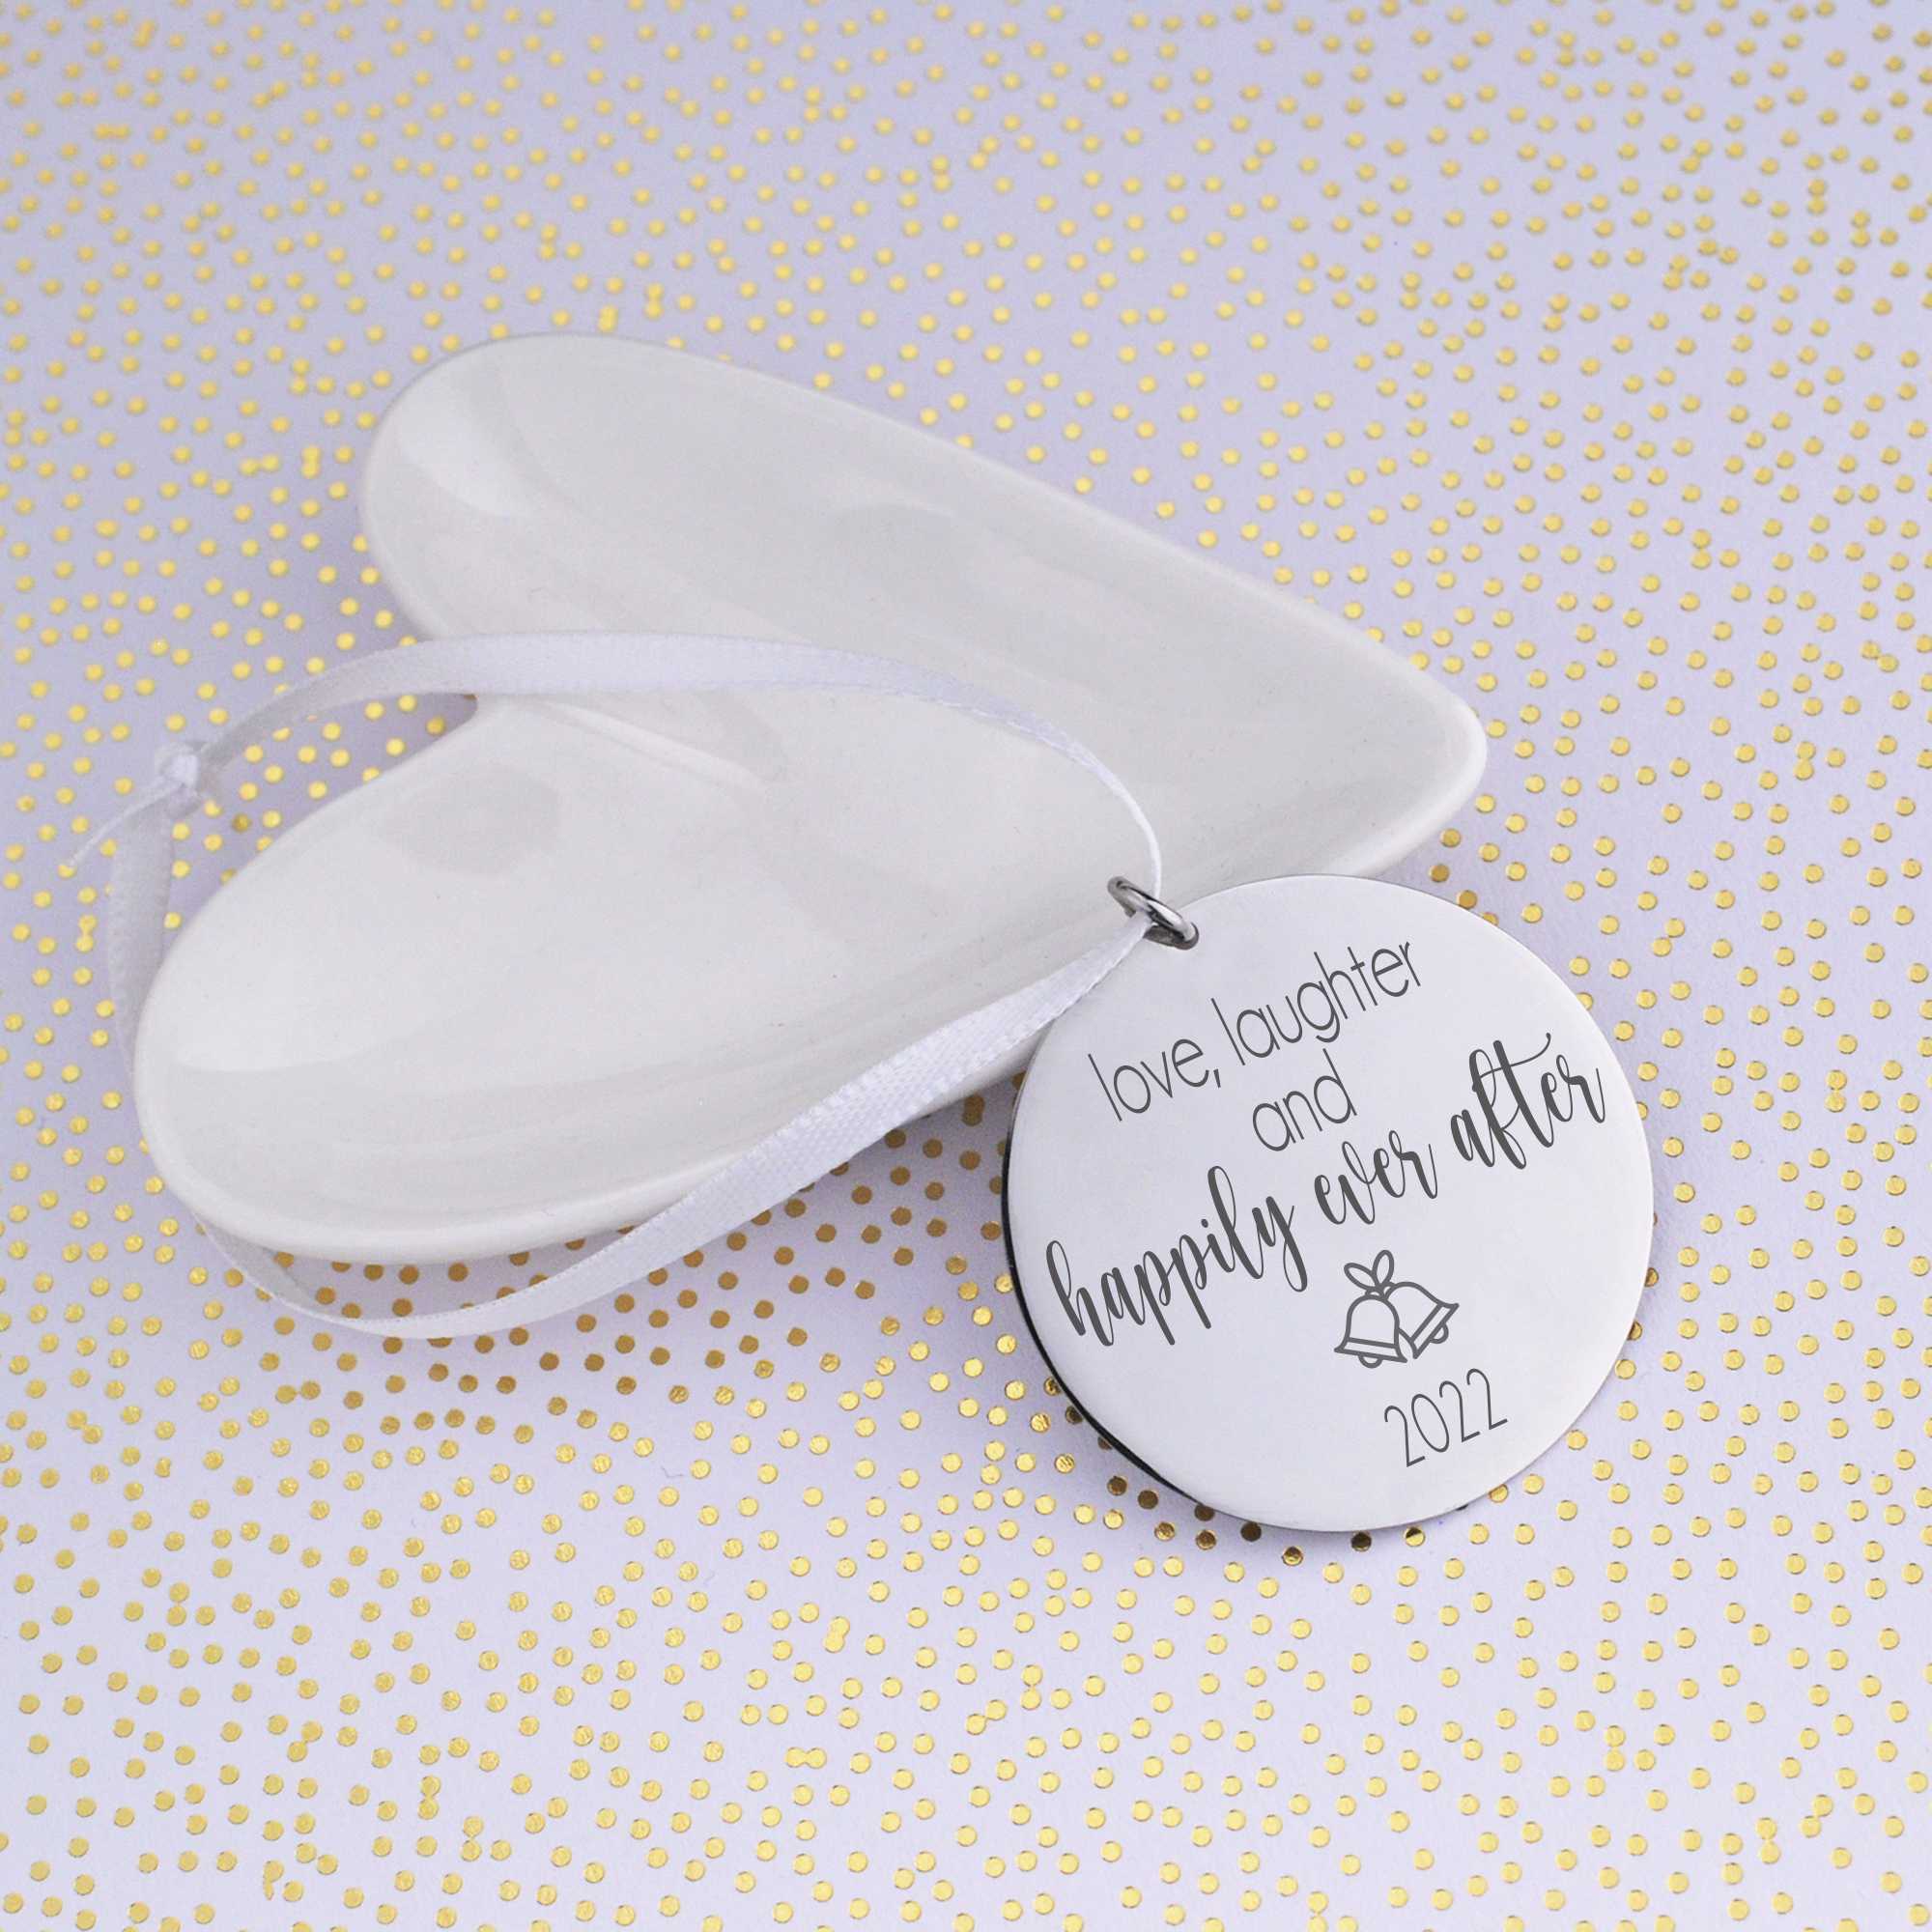 Love, Laughter, Happily Ever After - Ornament for Newlyweds